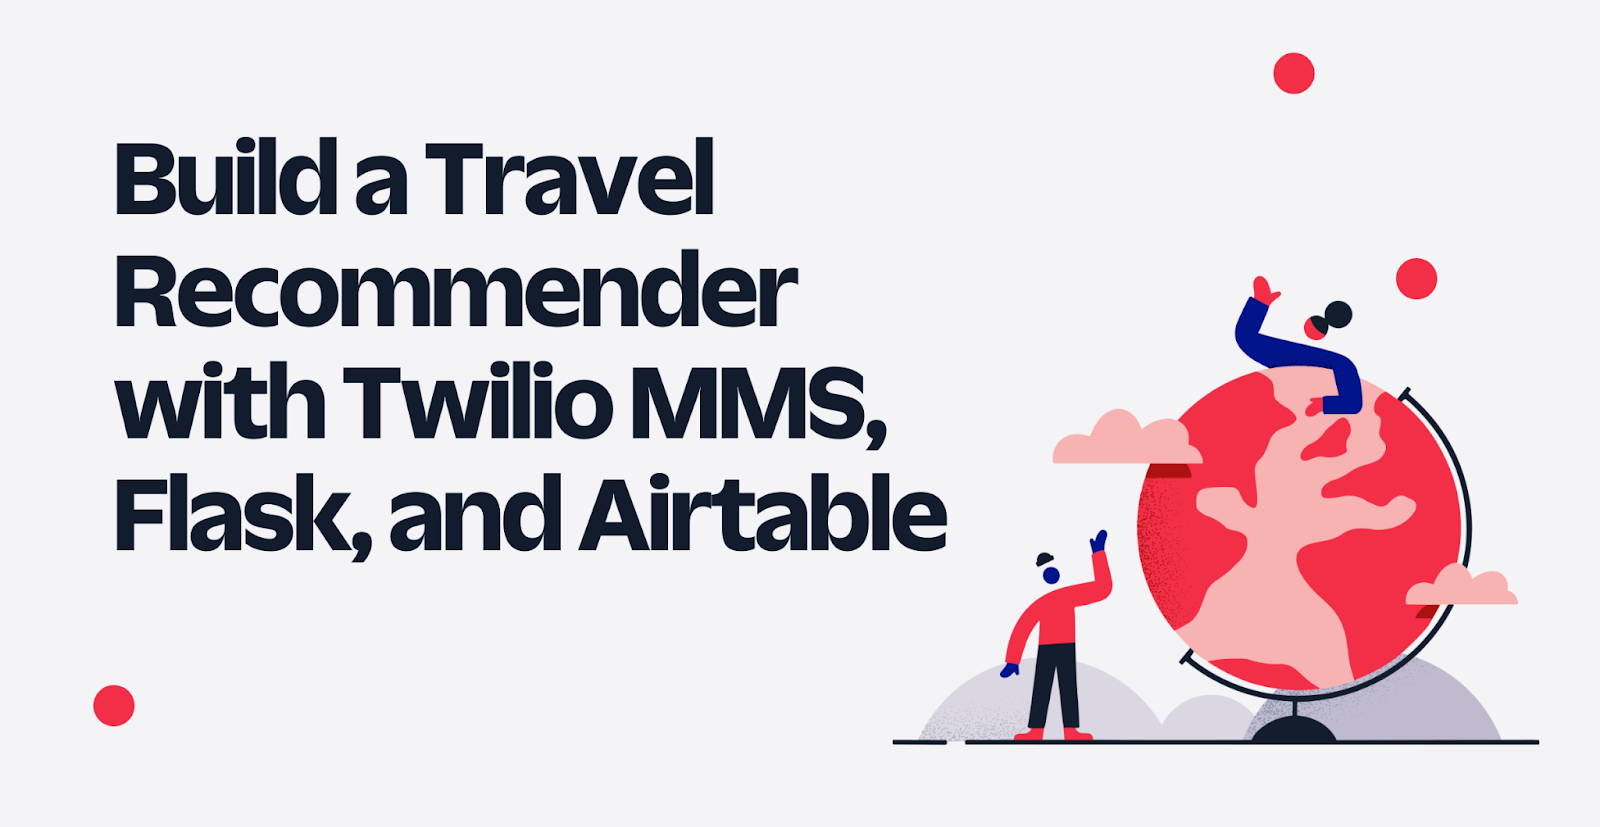 Build a Travel Recommender with Twilio MMS, Flask, and Airtable